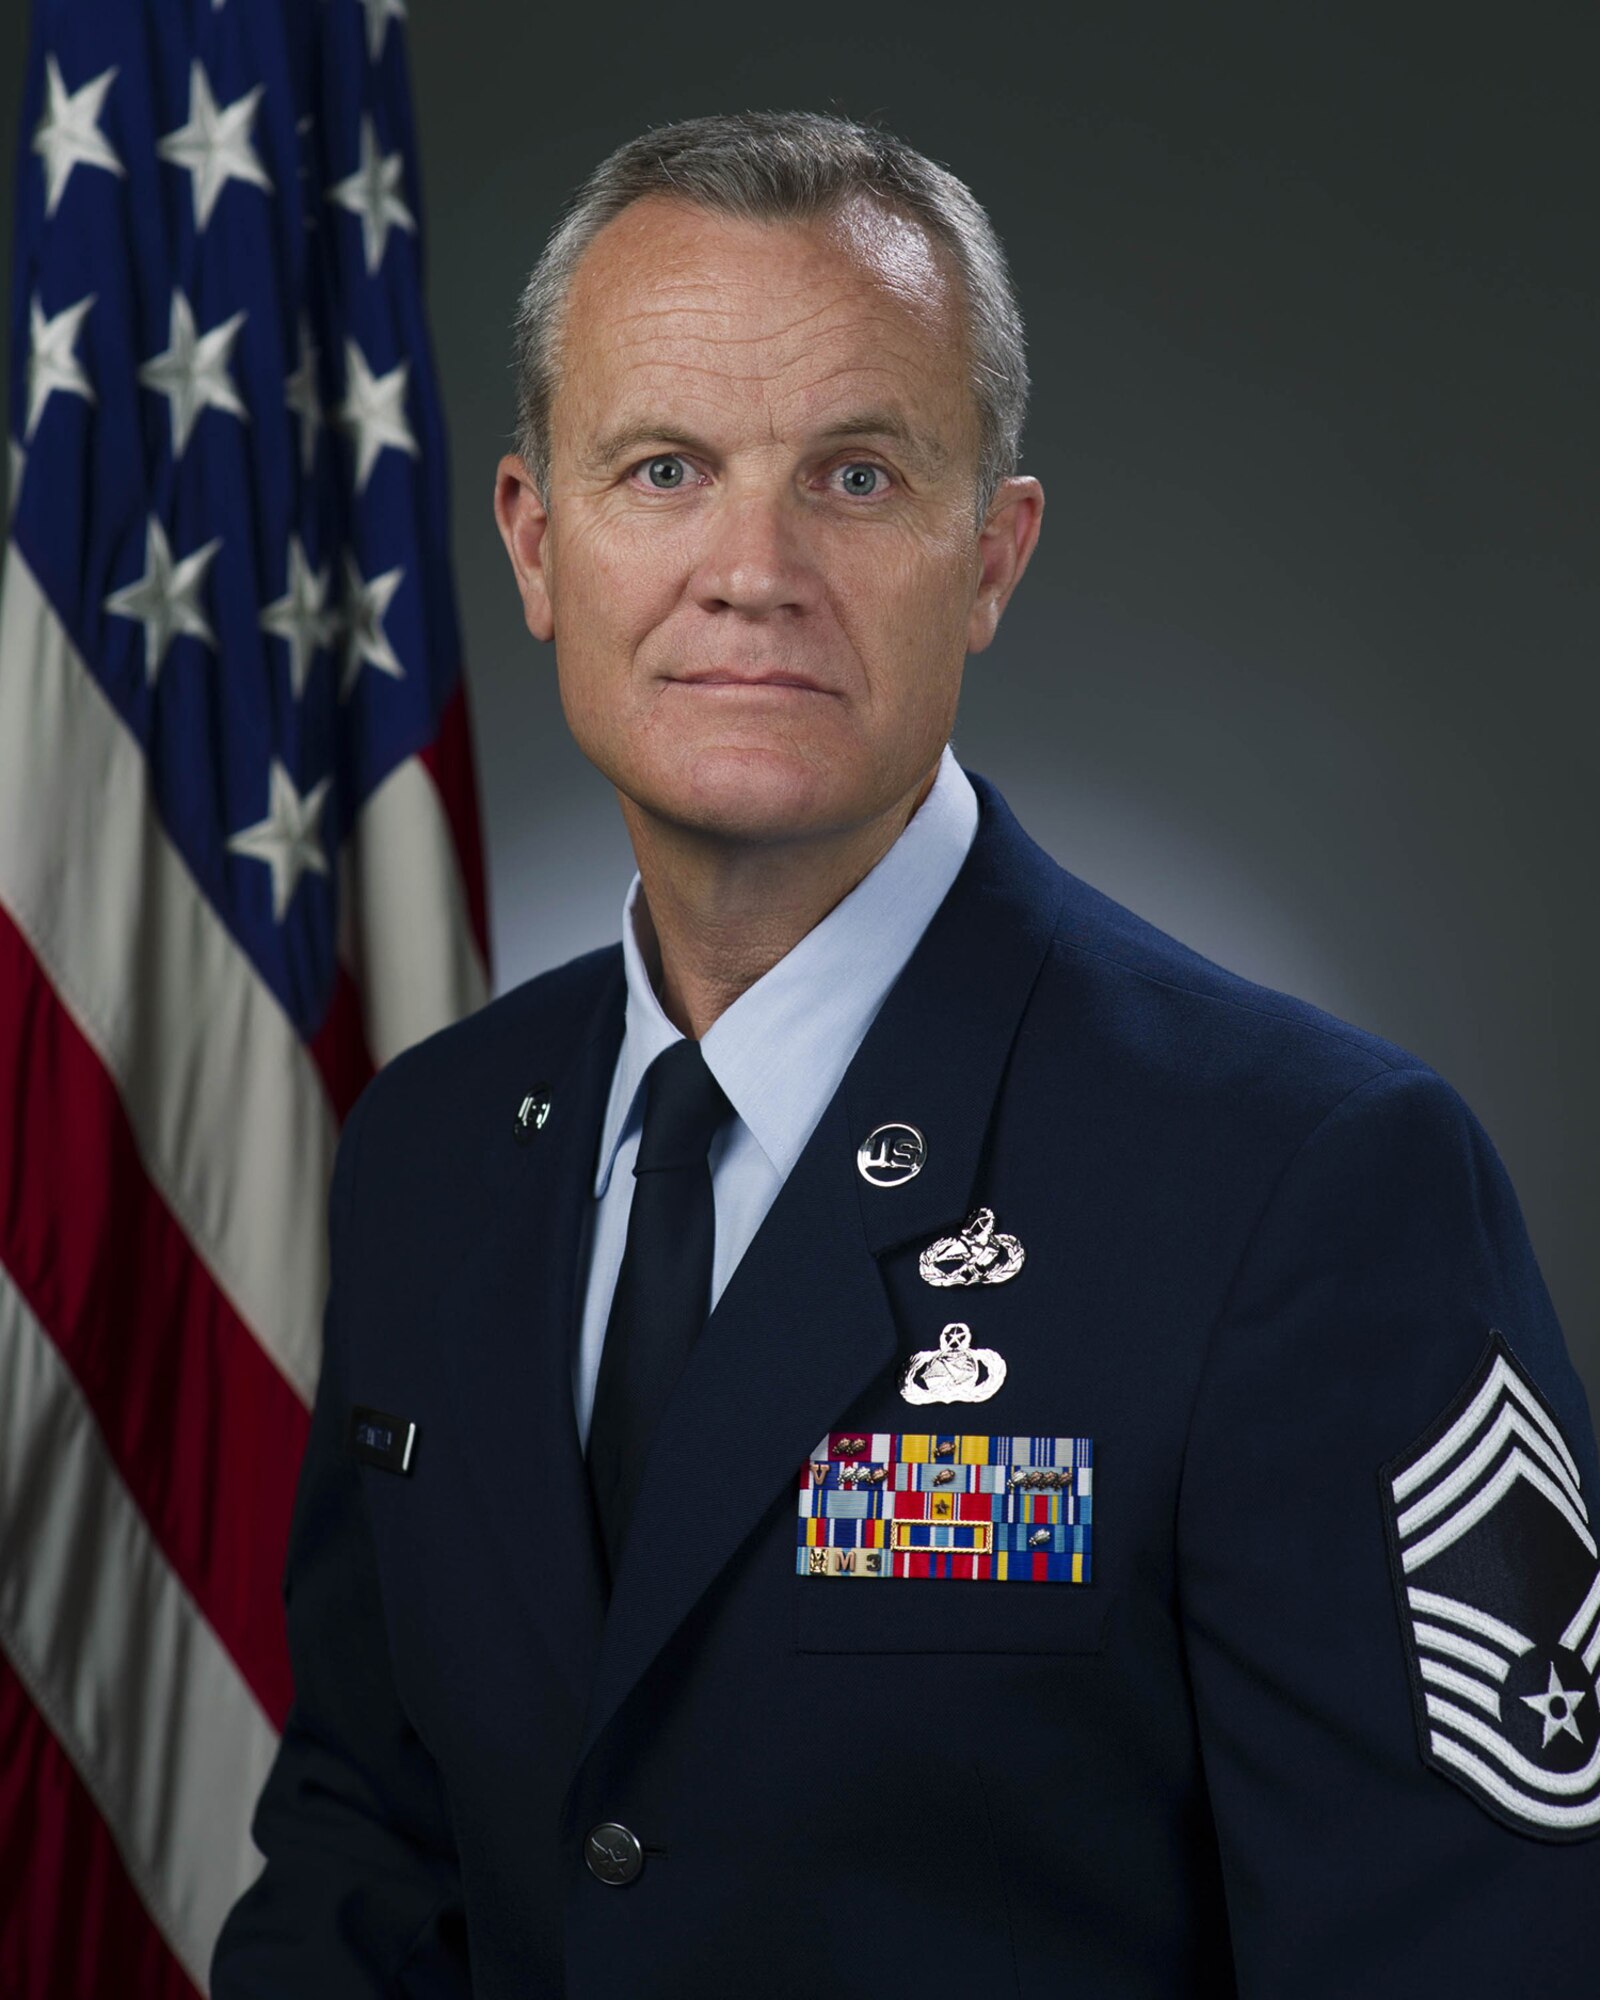 Chief Master Sgt. James E. Standley, 349th Maintenance Group Superintendent